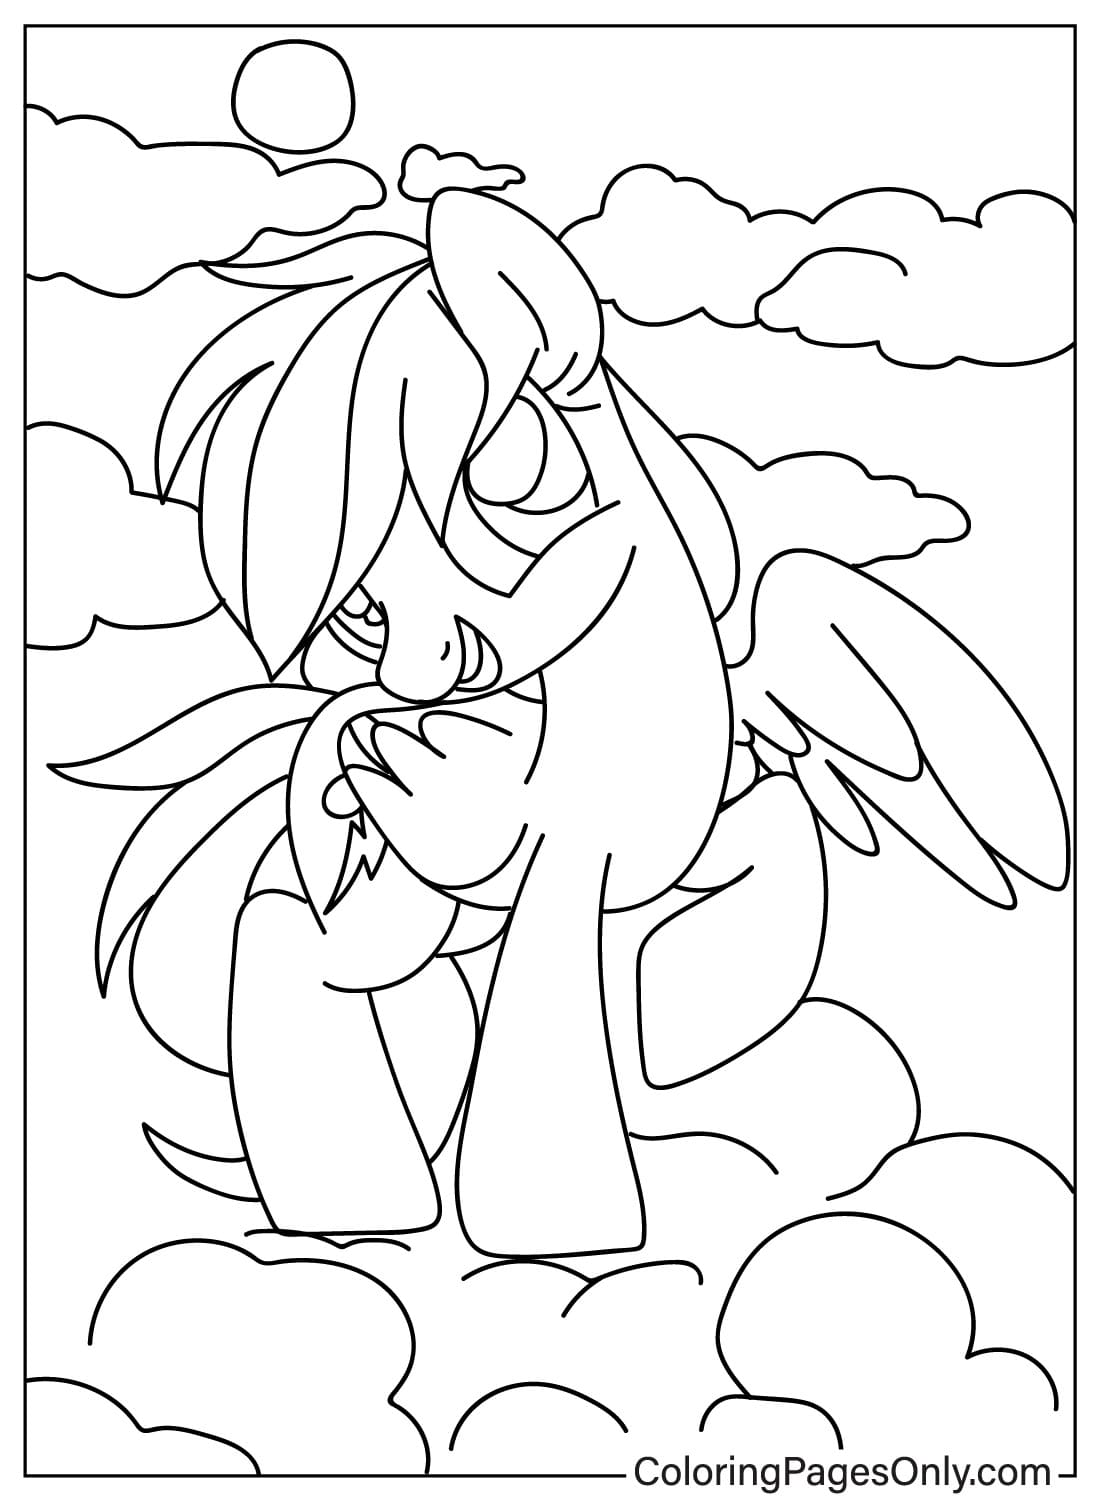 Free Rainbow Dash Coloring Page